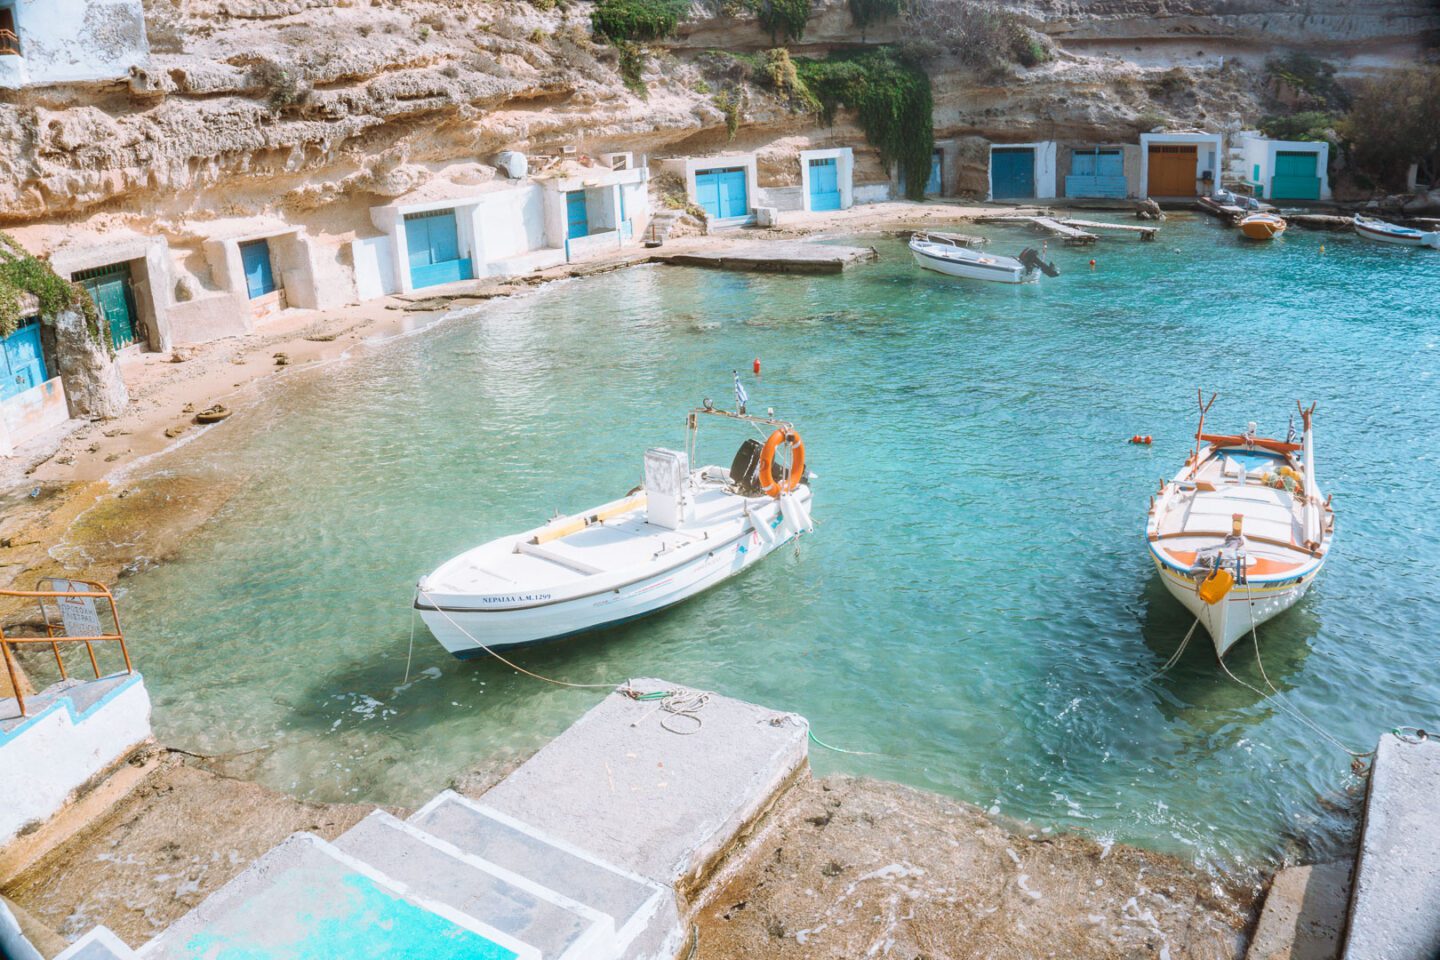 On this Milos travel guide you must visit Mandrakia, a tiny fishing village with colourful boathouses.